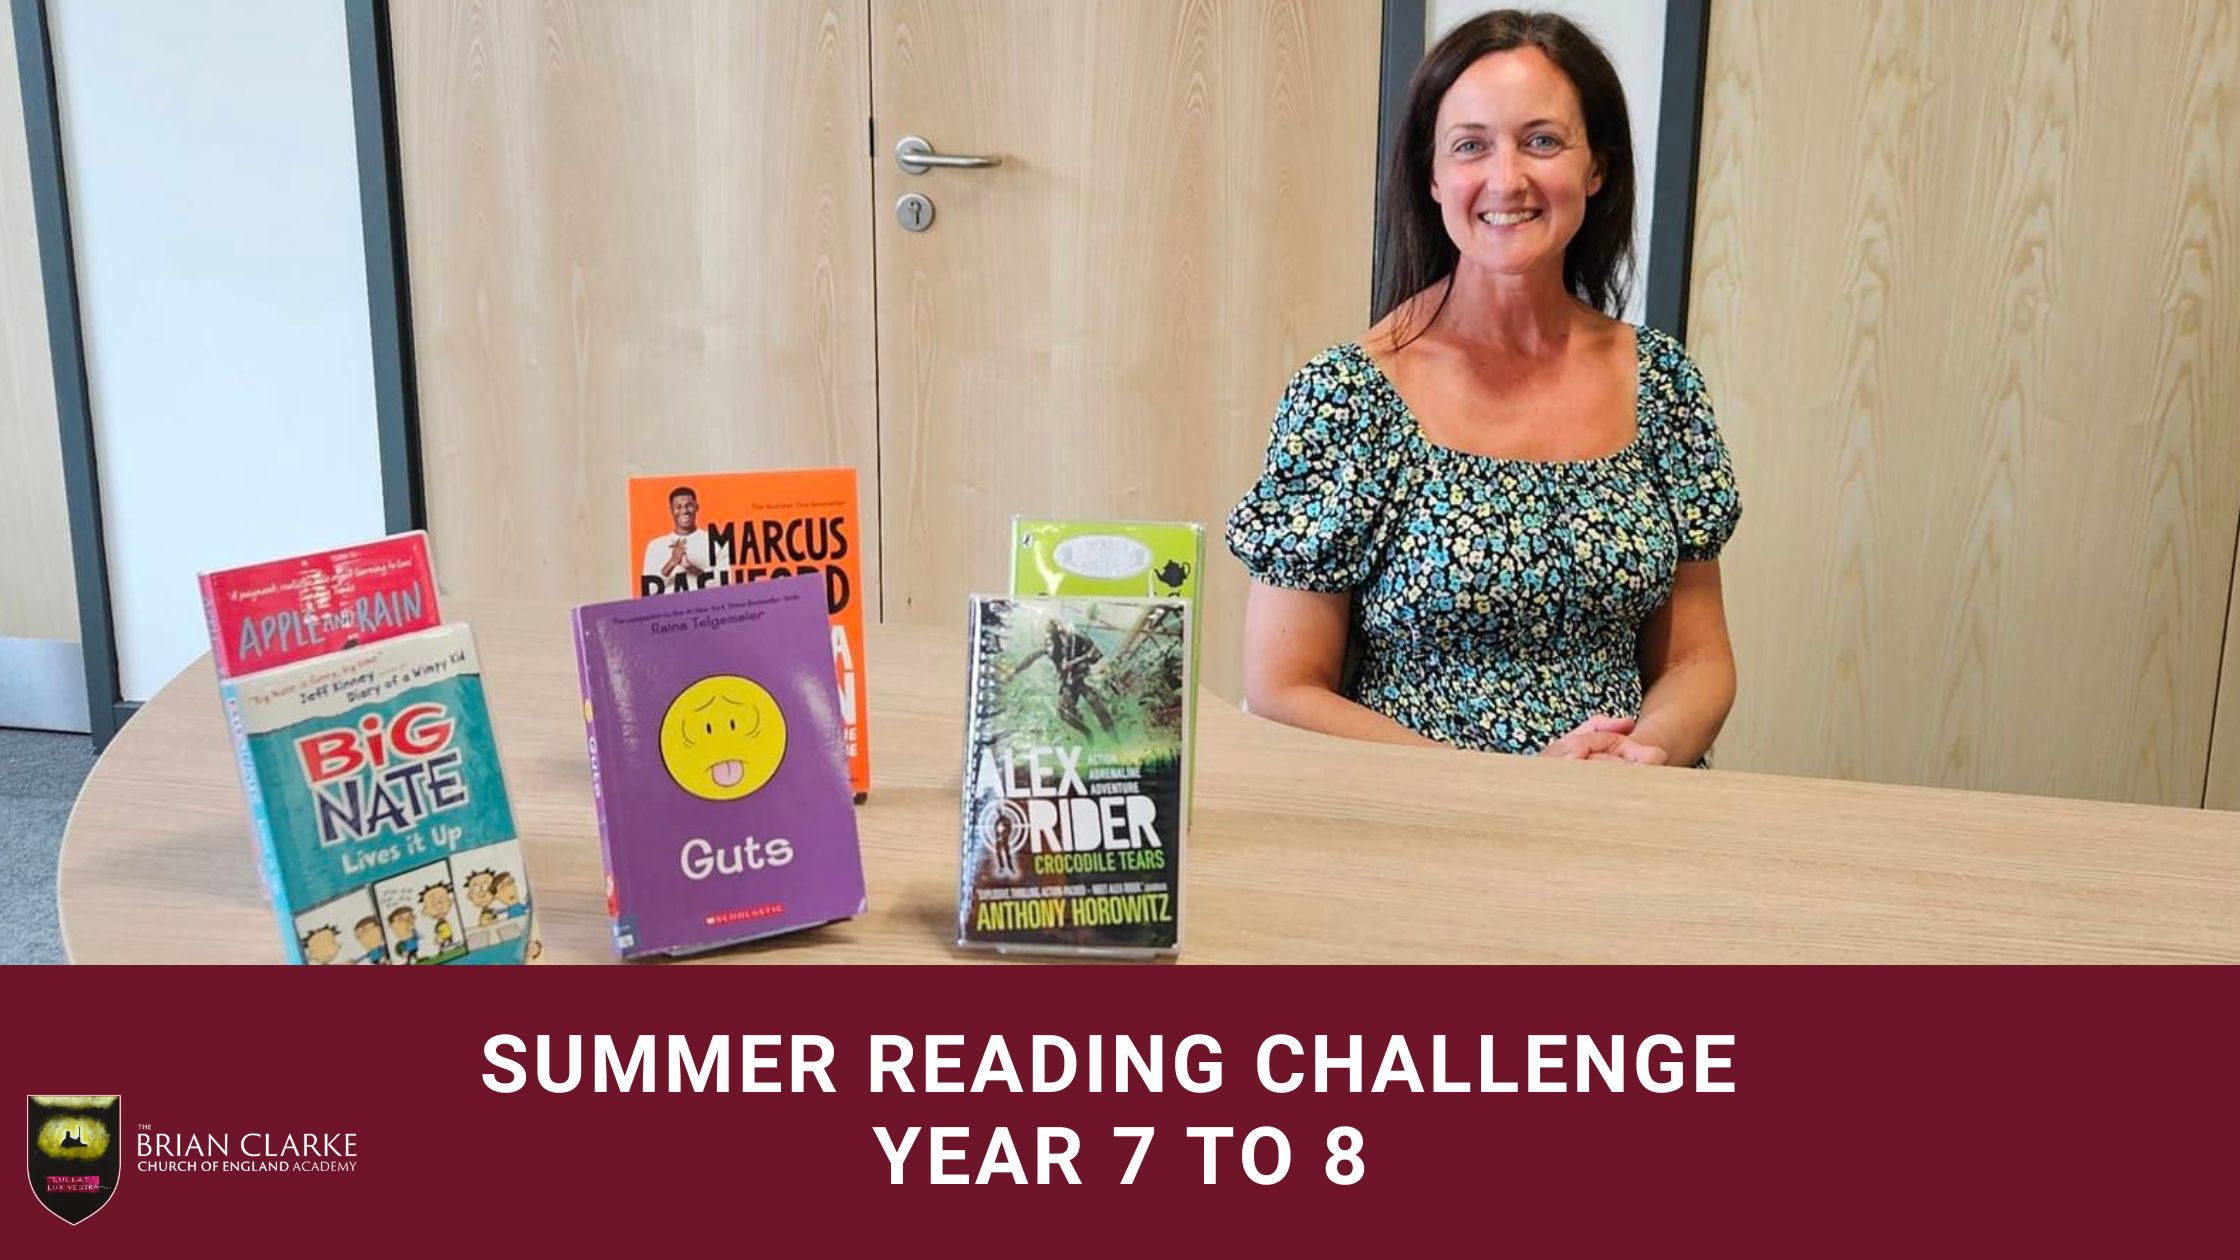 Summer Reading Challenge The Brian Clarke Church of England Academy